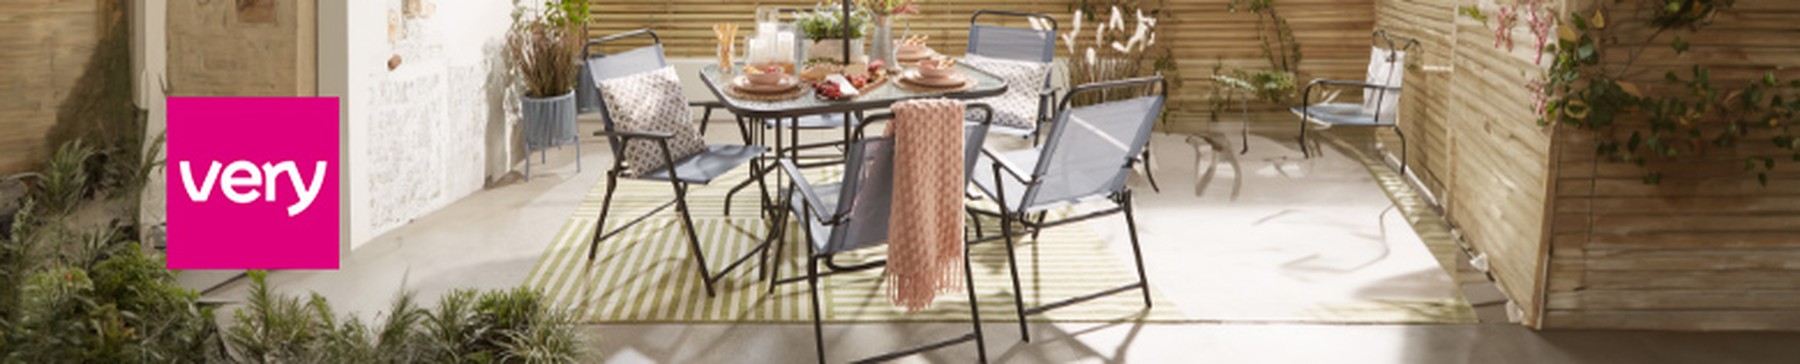 Up to 40% off selected Home & Garden